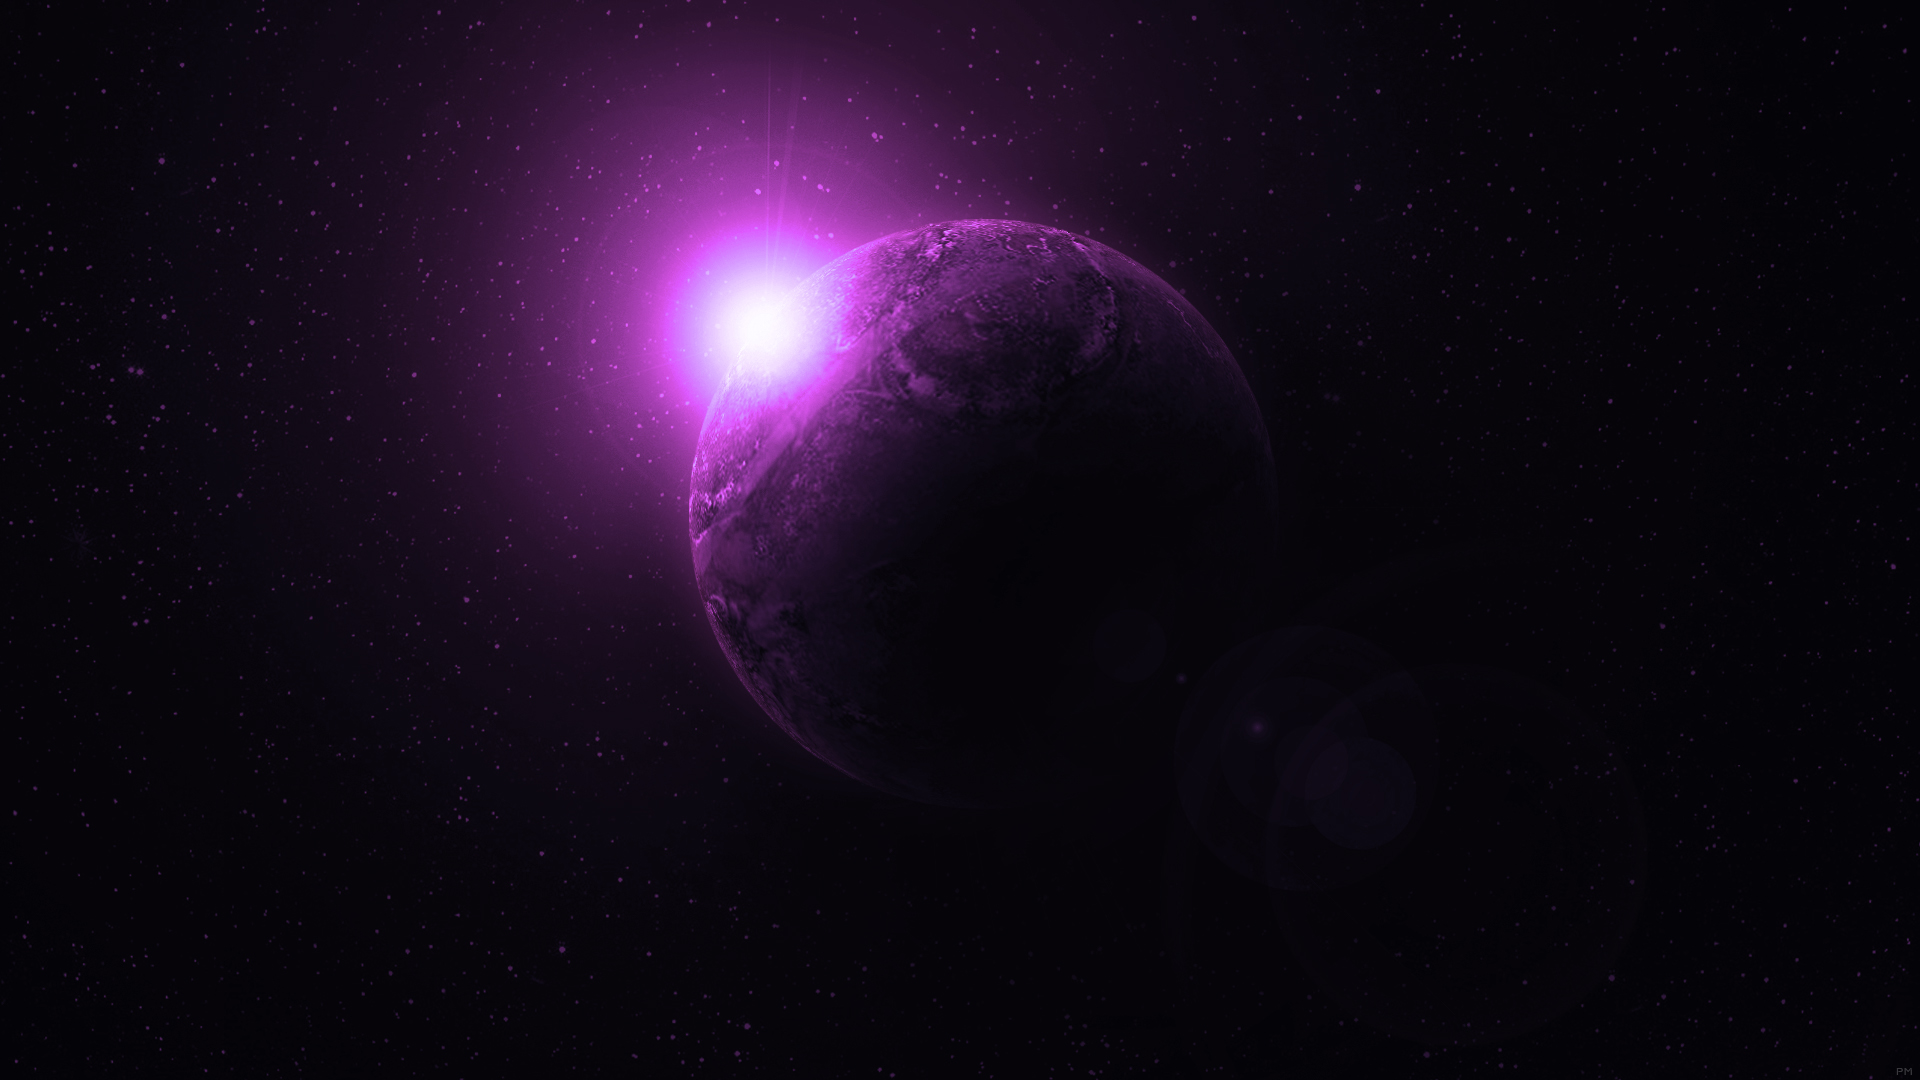 [Wallpaper]   Lost in Space by attats on